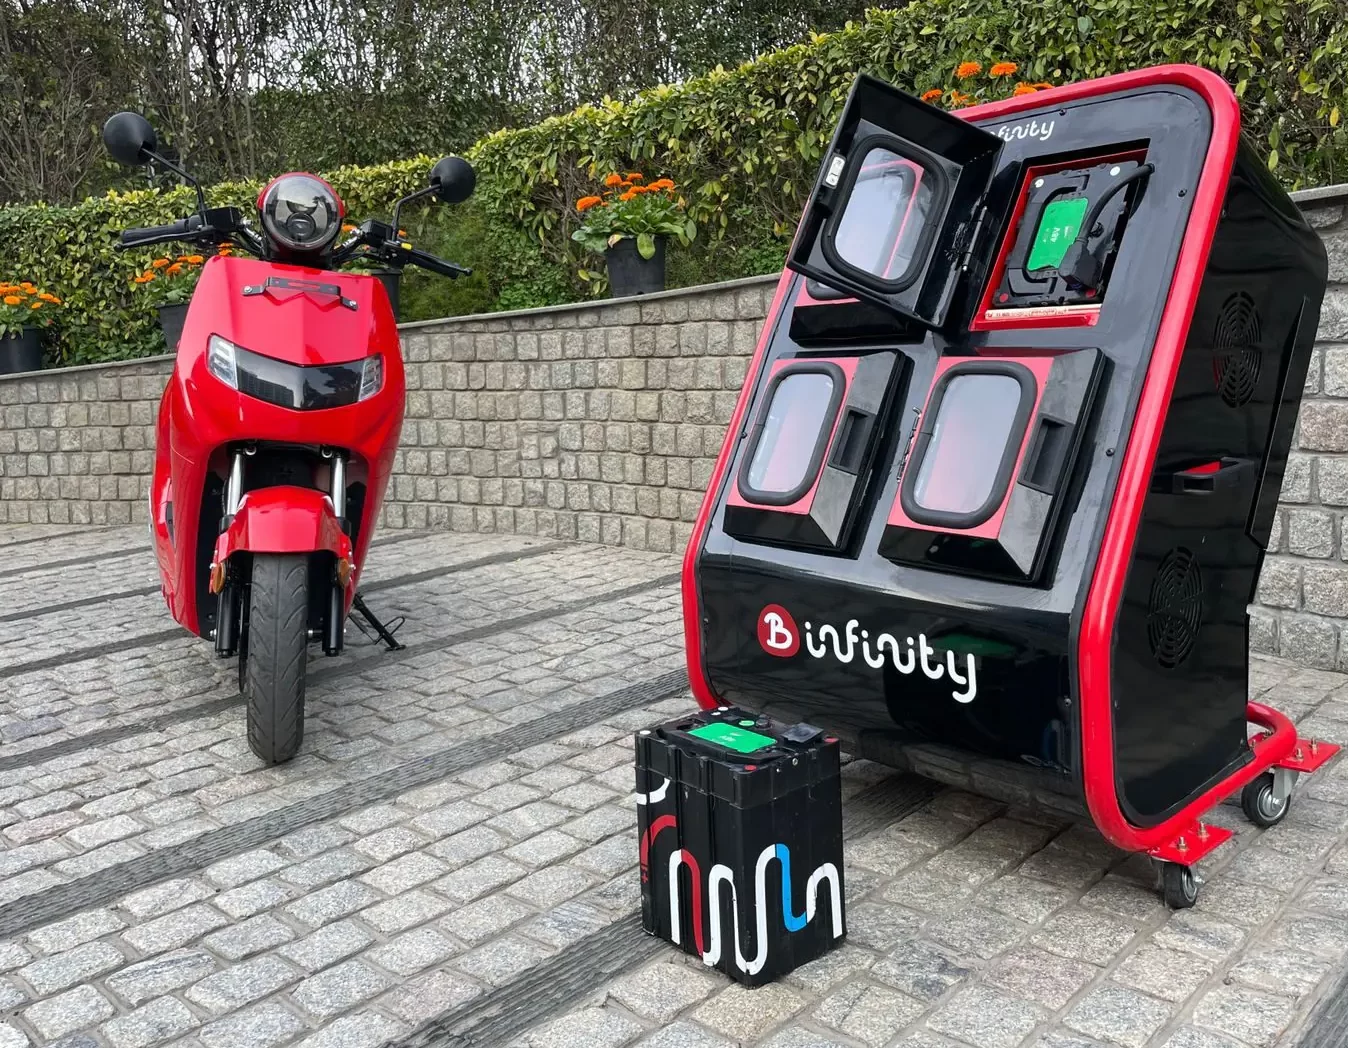 https://e-vehicleinfo.com/electric-scooters-with-swappable-batteries-in-indian-market/